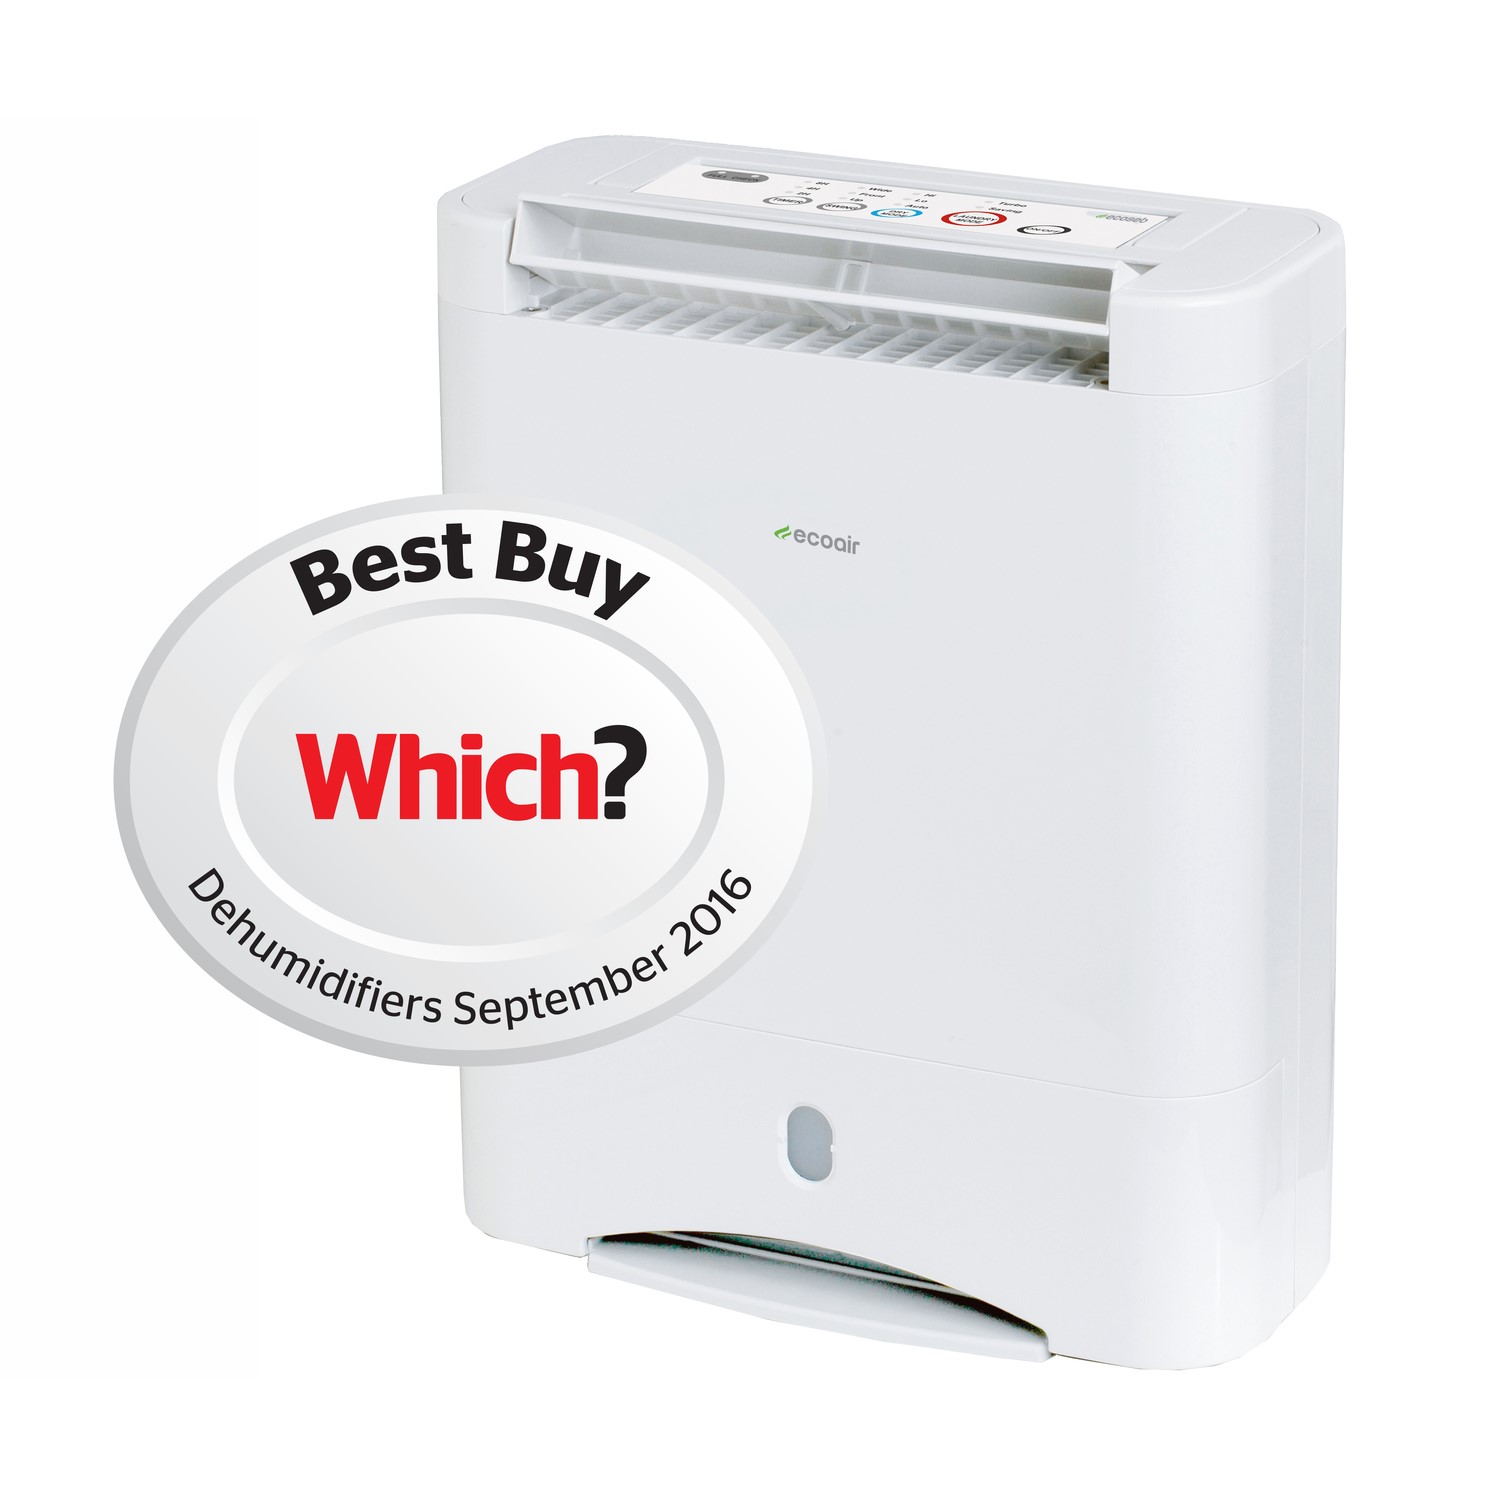 Dehumidifier: Which Is Best To Buy